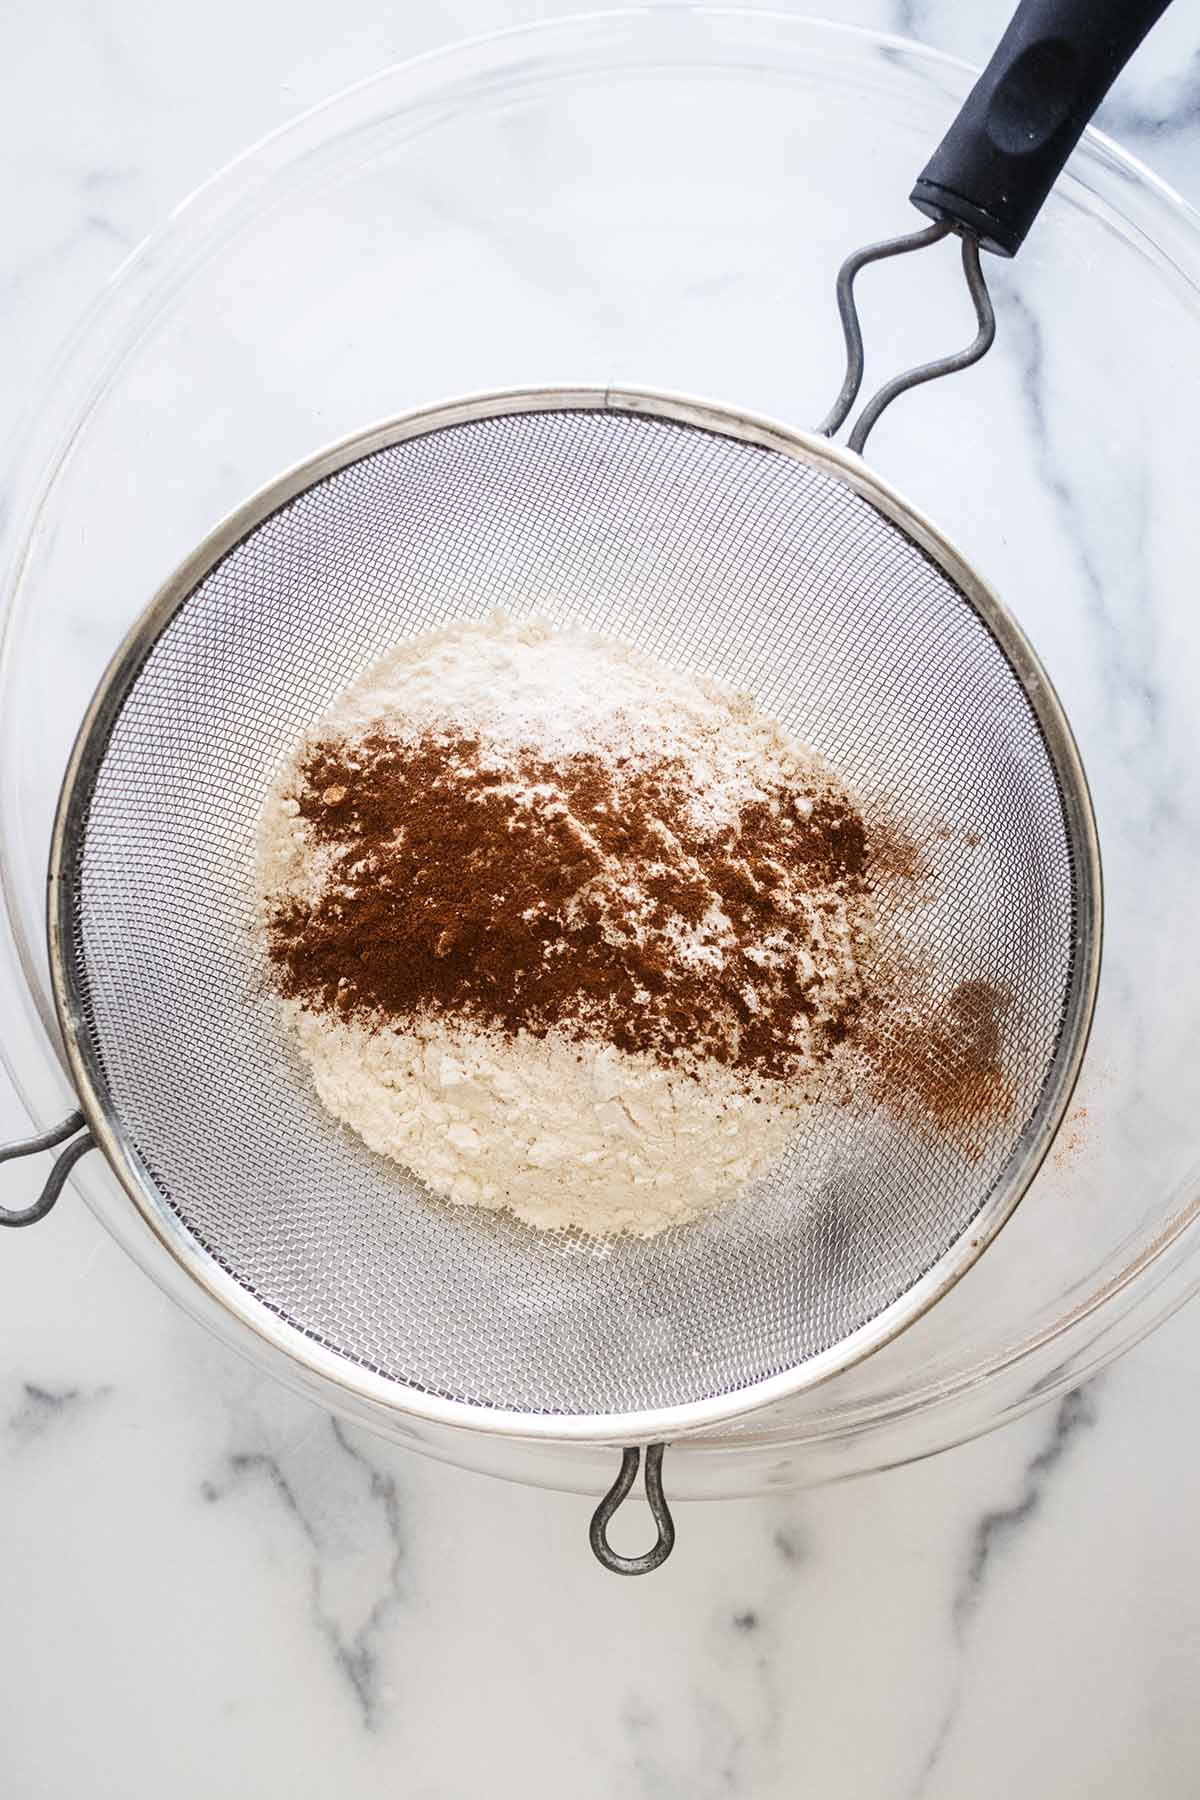 Dry ingredients in a mesh strainer over a large glass bowl.